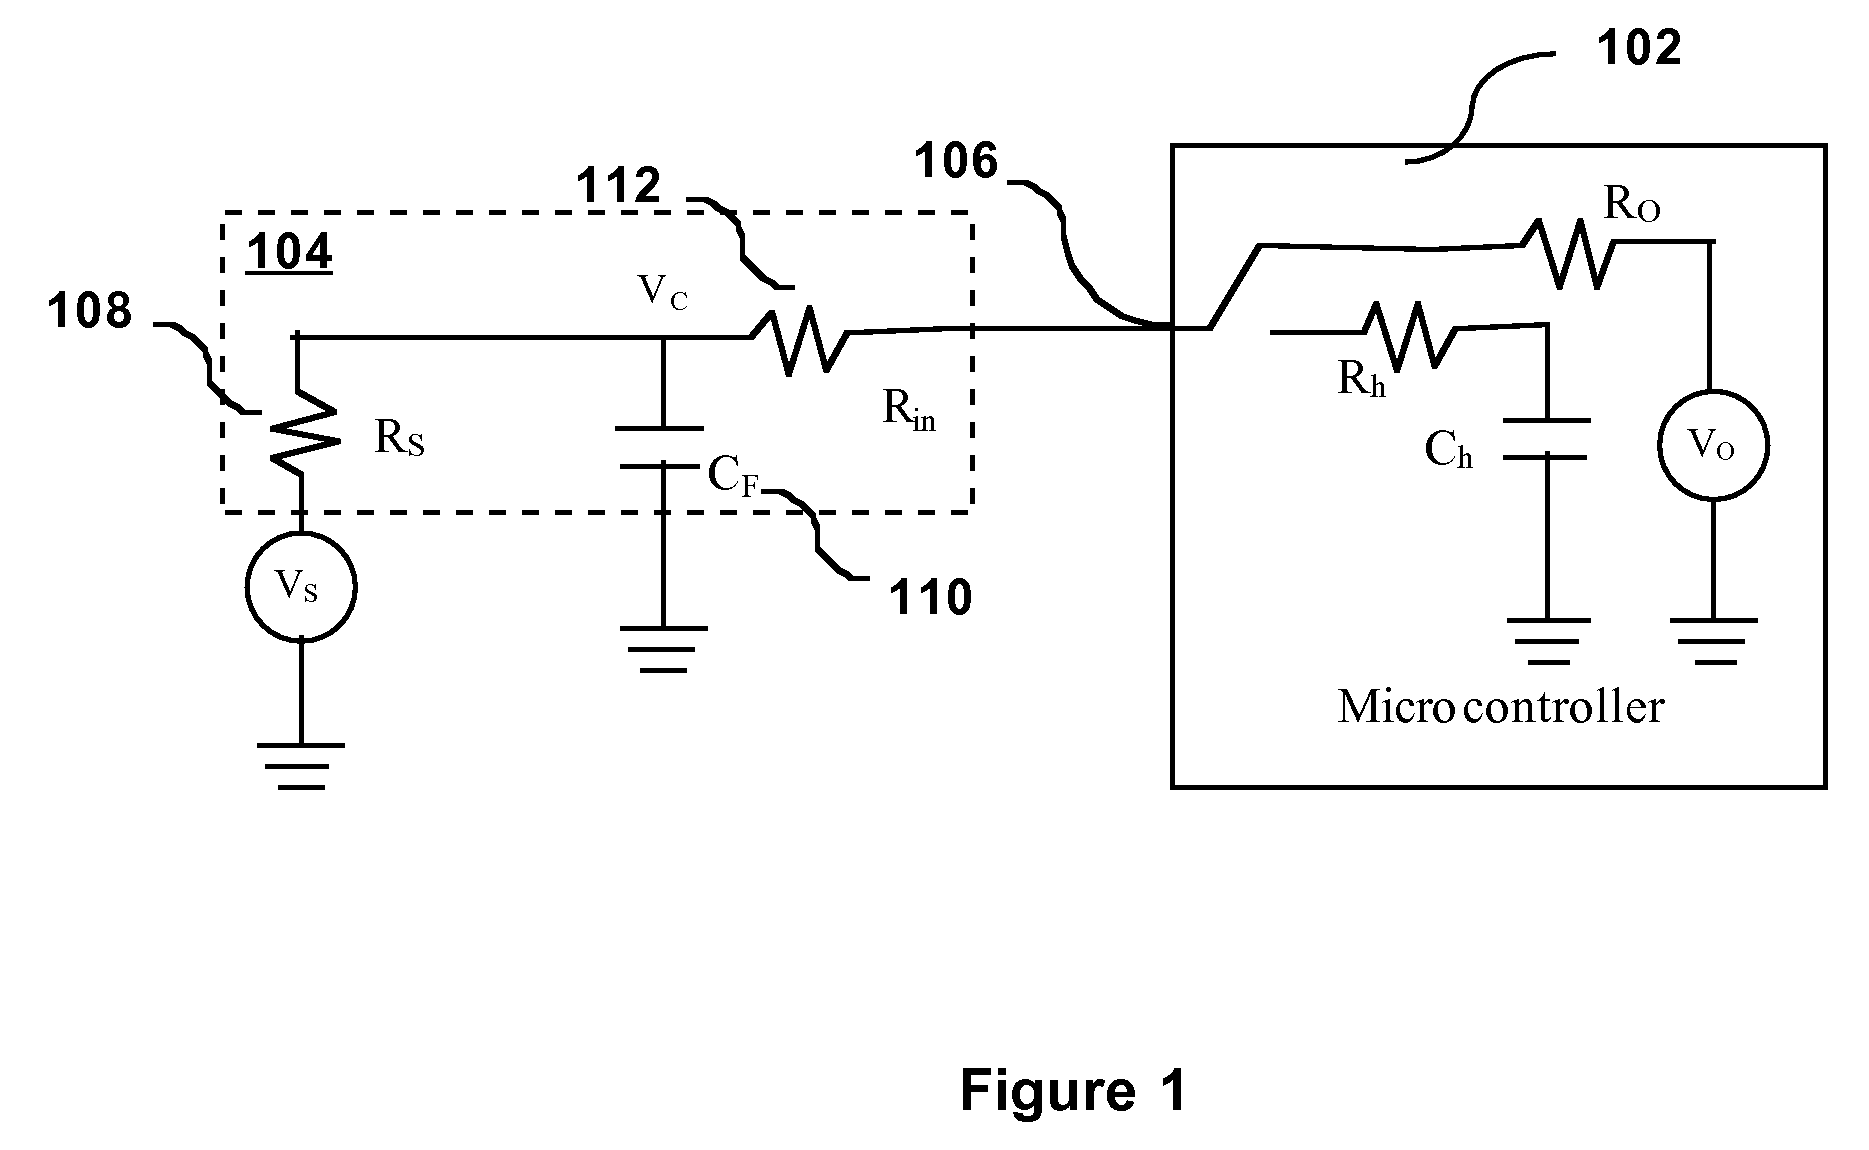 Method for increasing the resolution of analog to digital conversion